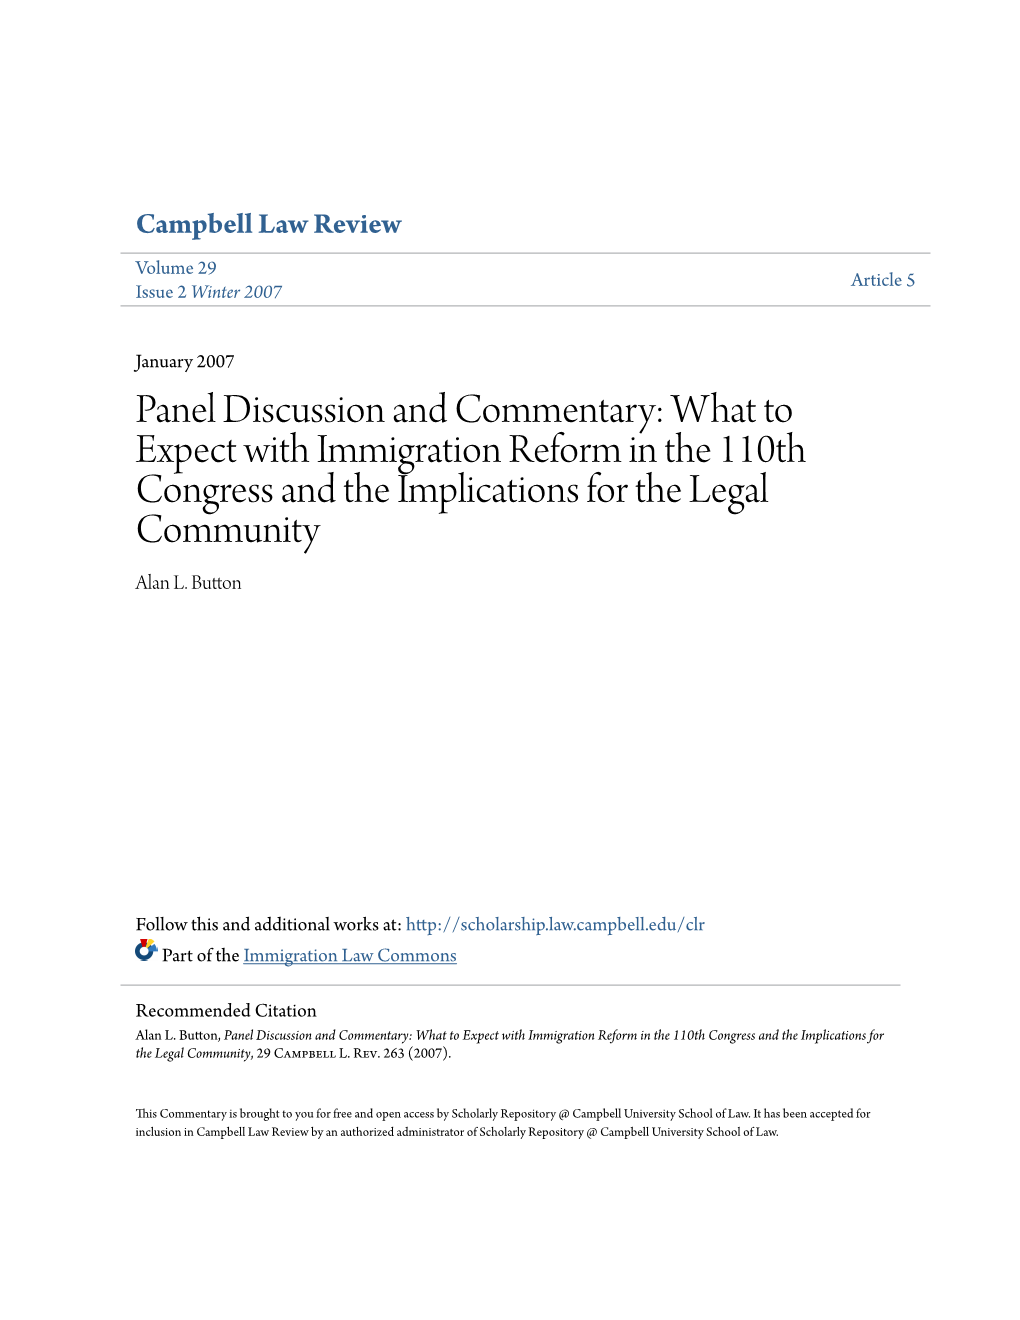 Panel Discussion and Commentary: What to Expect with Immigration Reform in the 110Th Congress and the Implications for the Legal Community Alan L